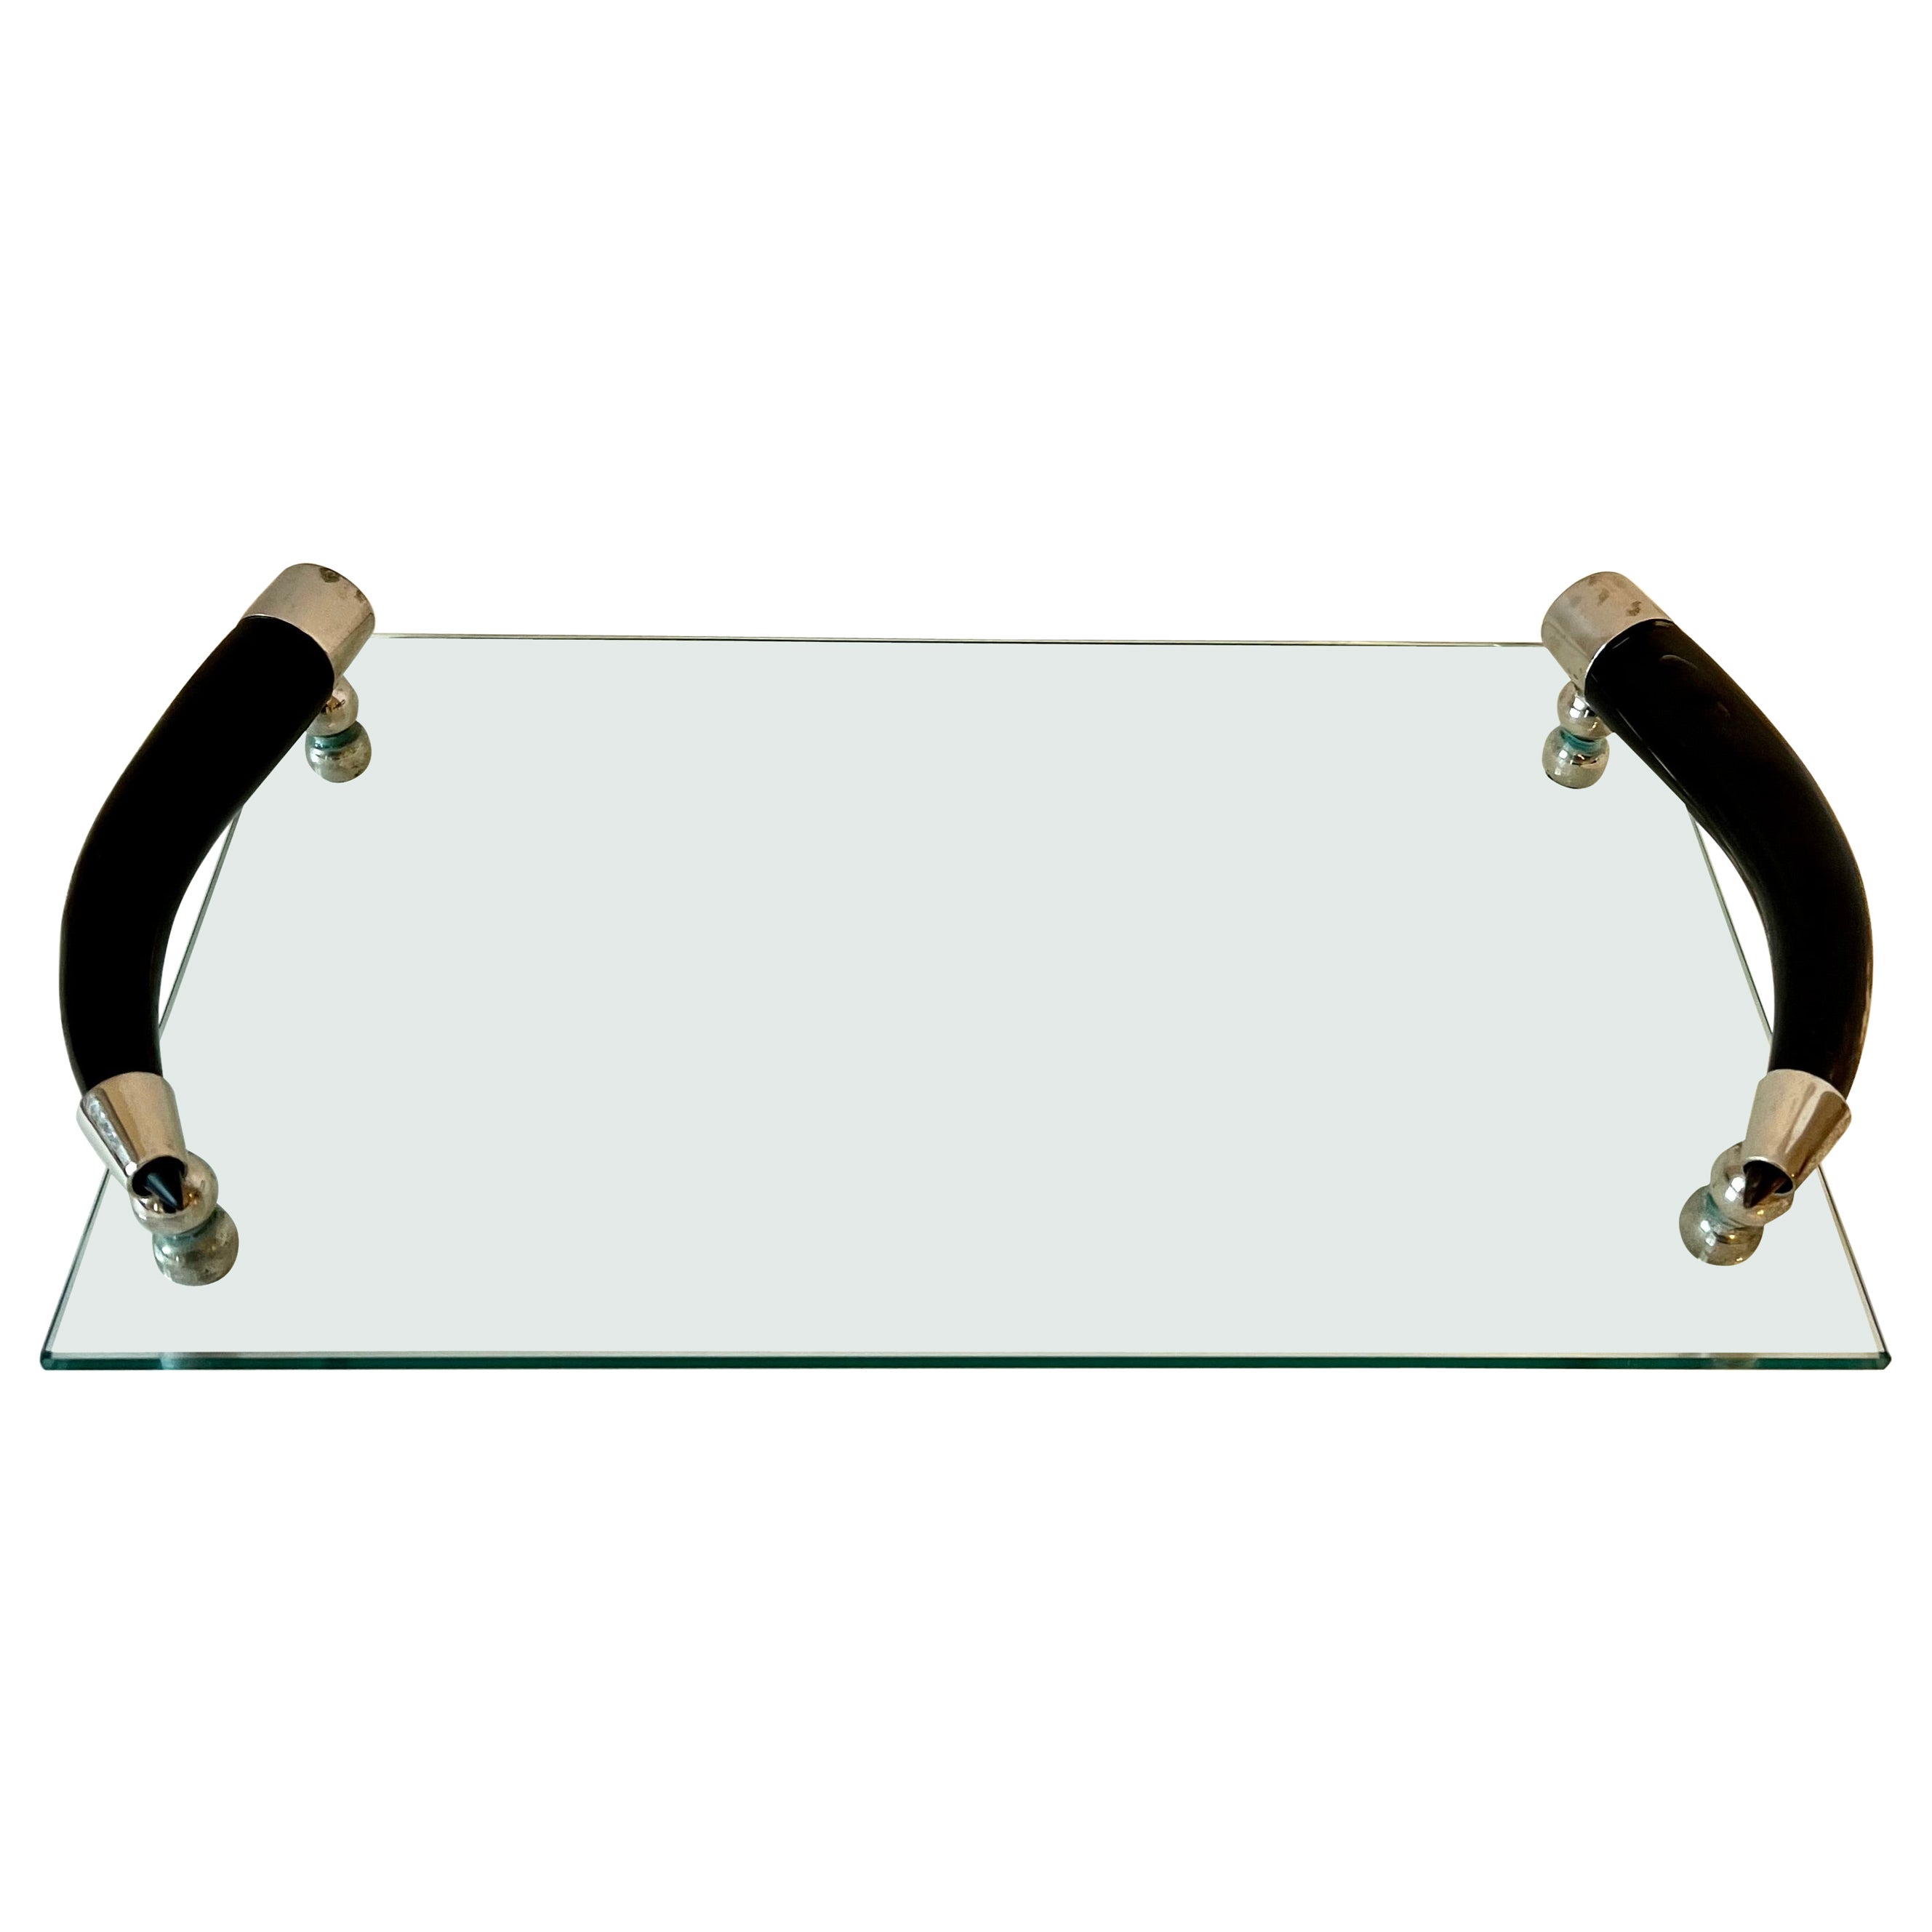 Rectangular Glass Tray with Bone Handles with Silver Plate Fittings and Feet For Sale